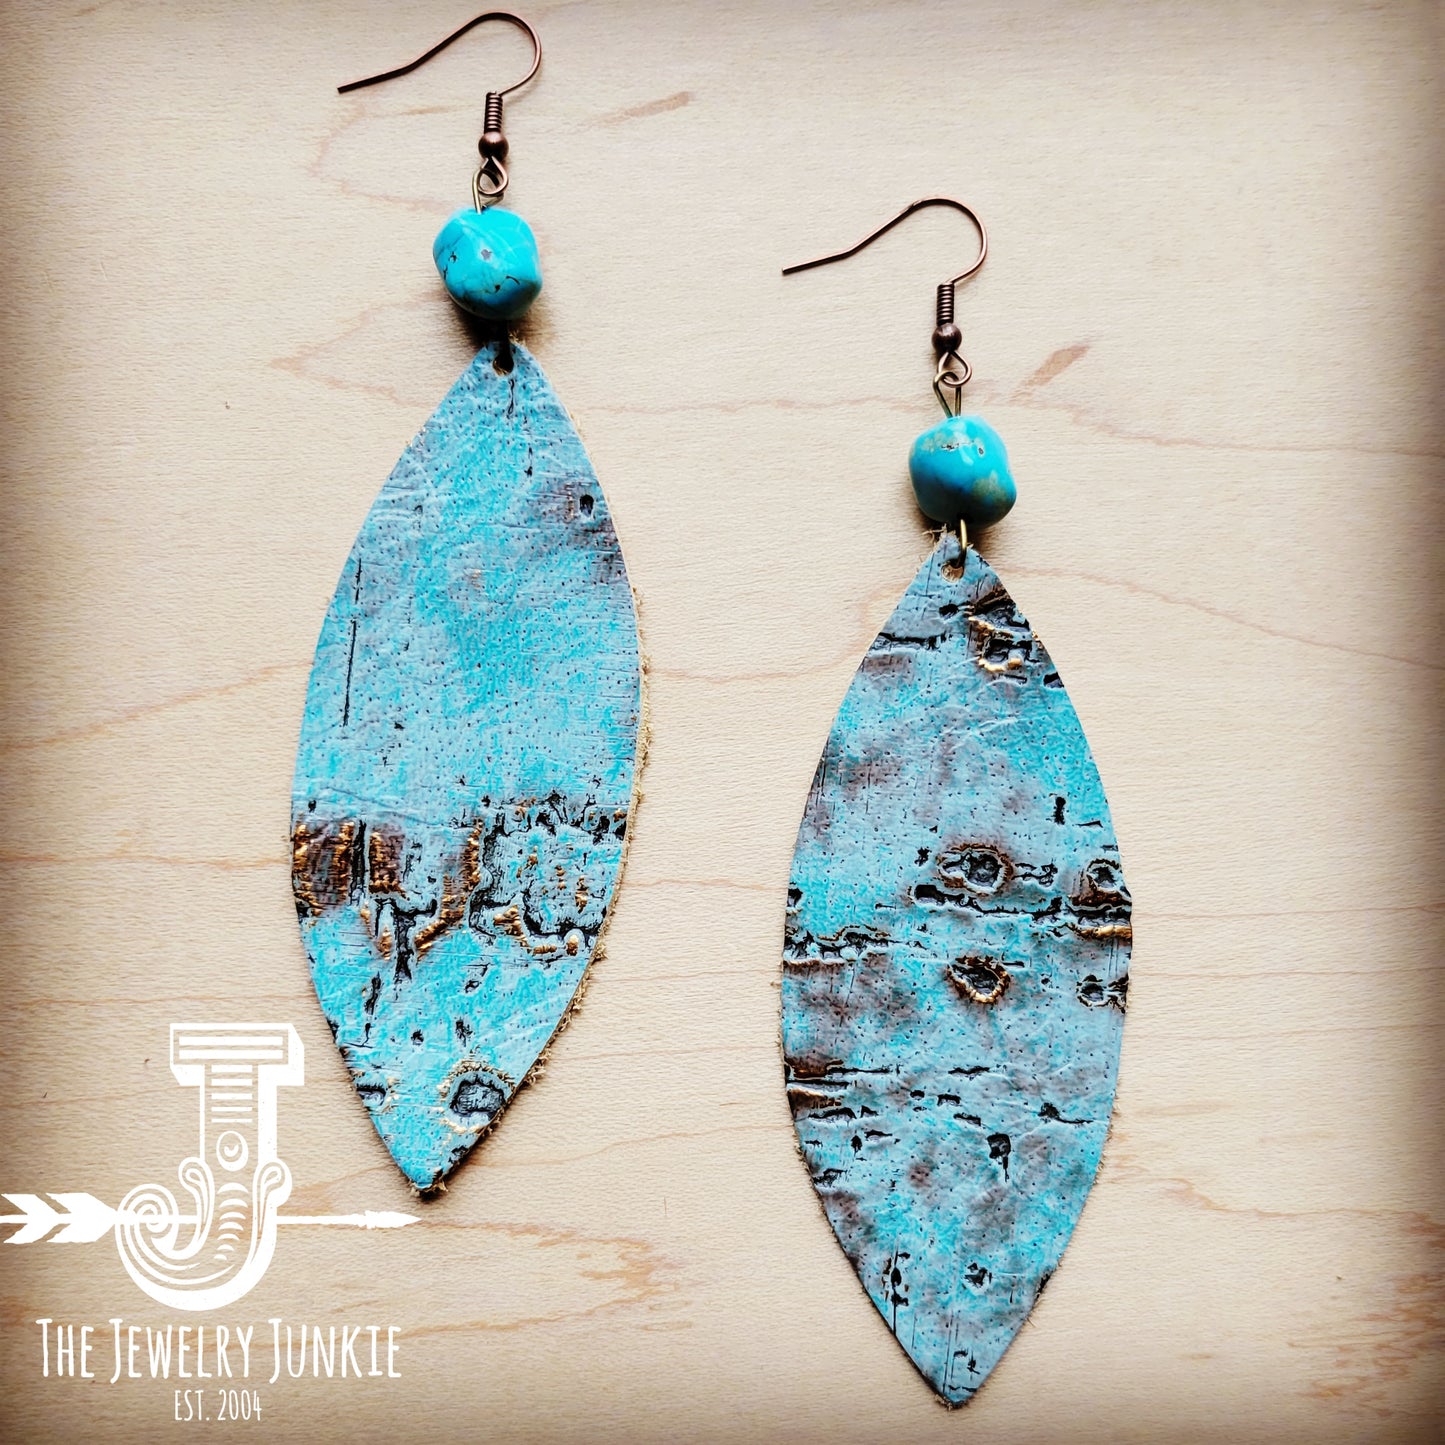 Leather Oval Earrings in Turquoise Metallic w/ Turquoise Accent 207c